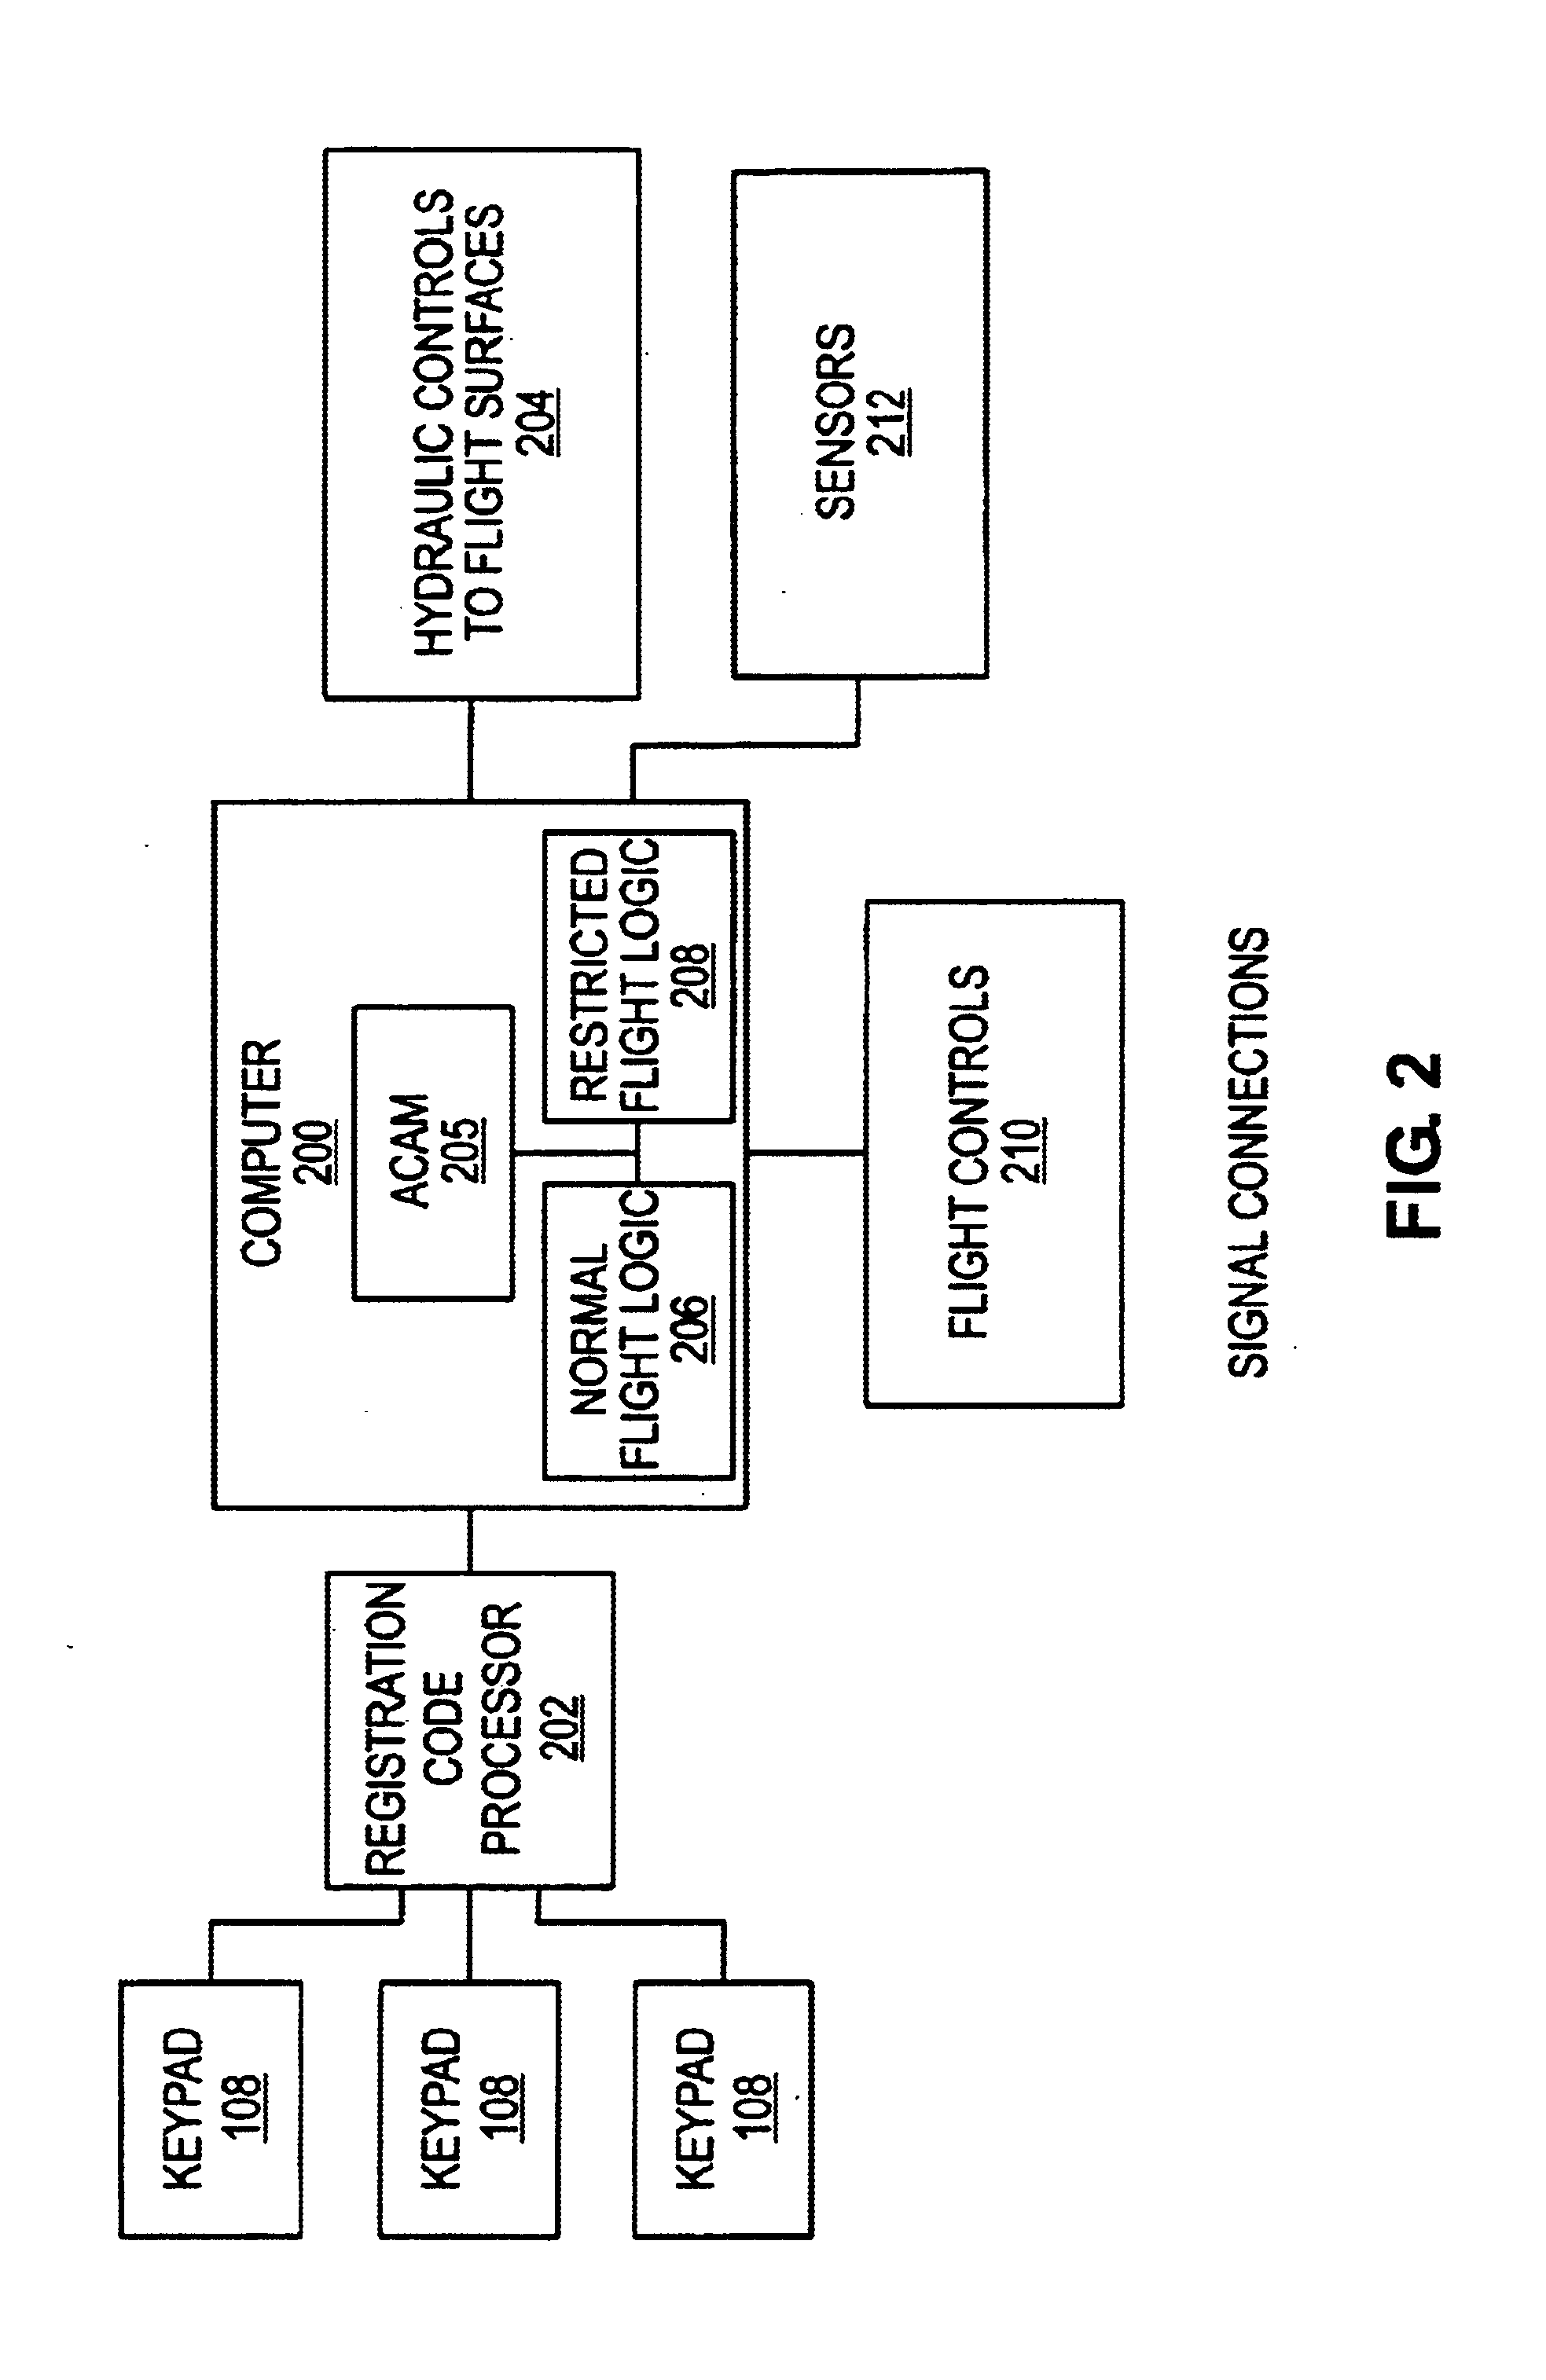 Aircraft flight security system and method